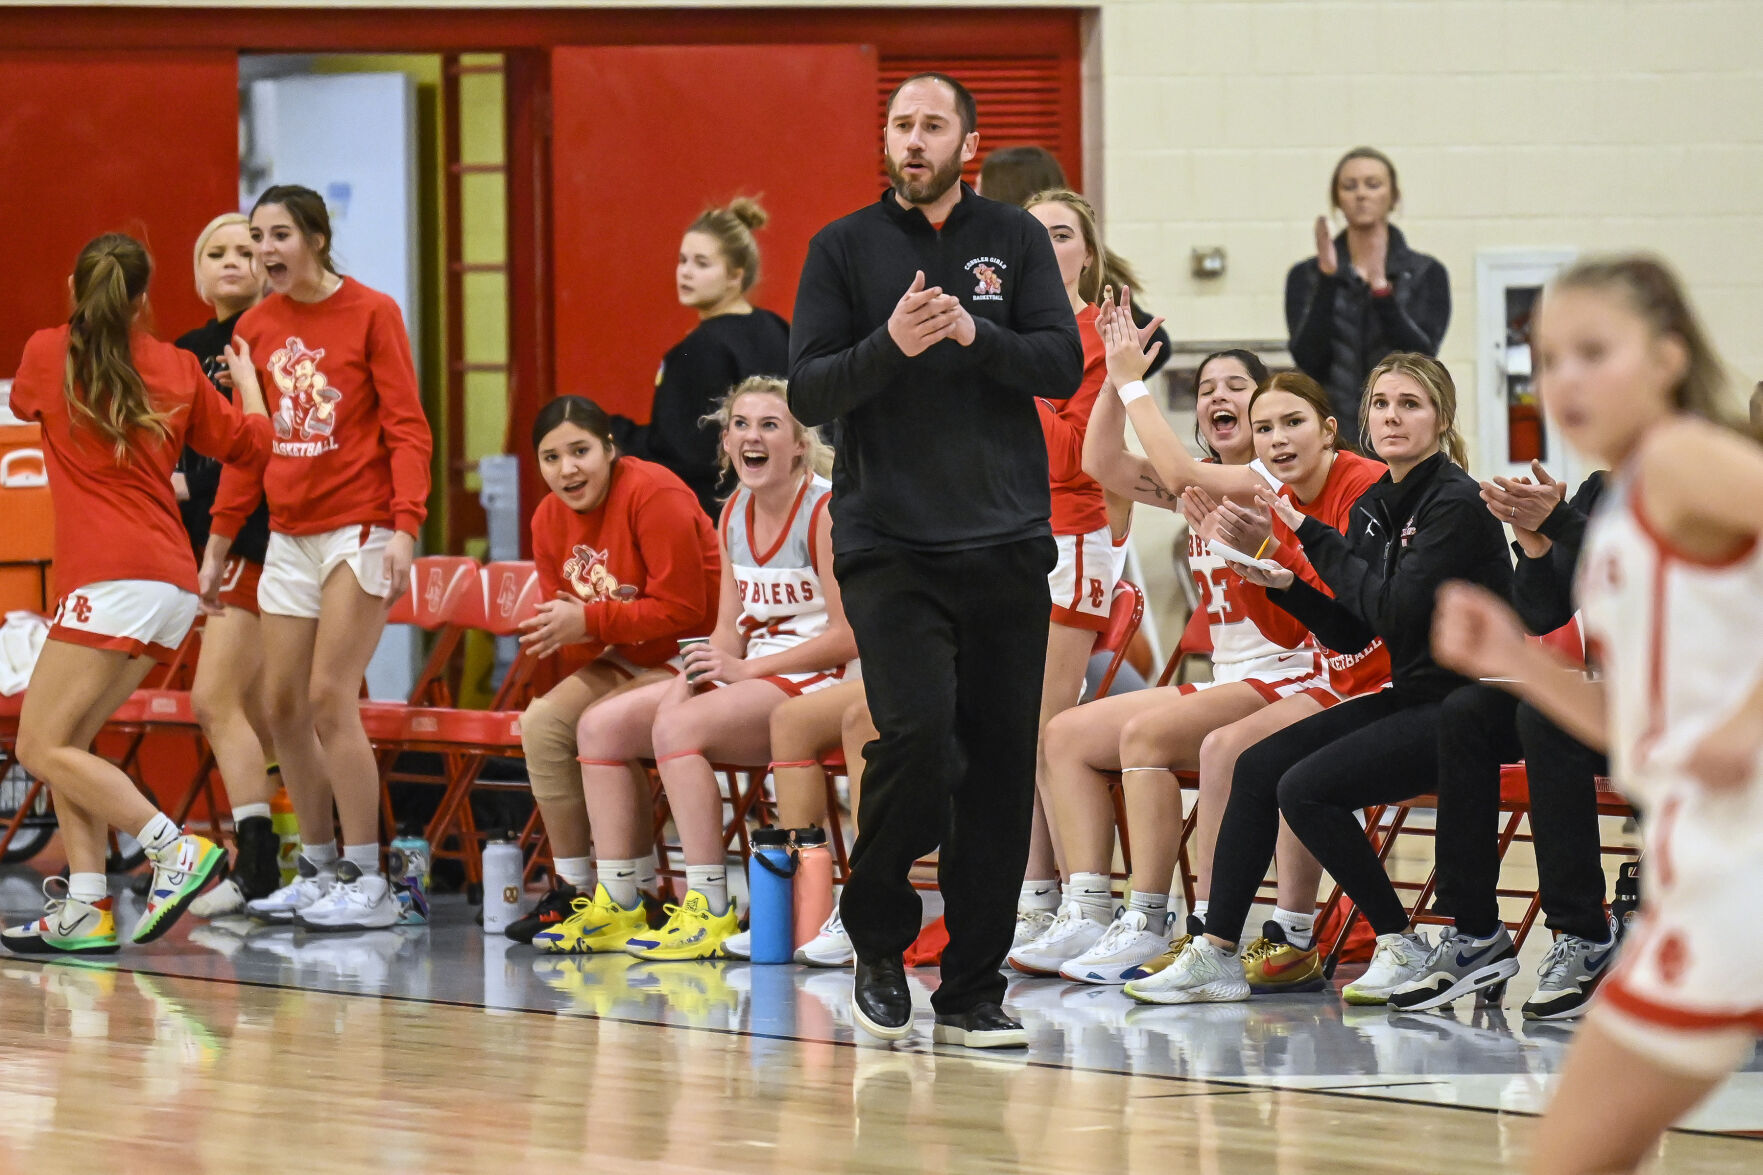 Josh Mach resigning as Central girls basketball coach in 1st year